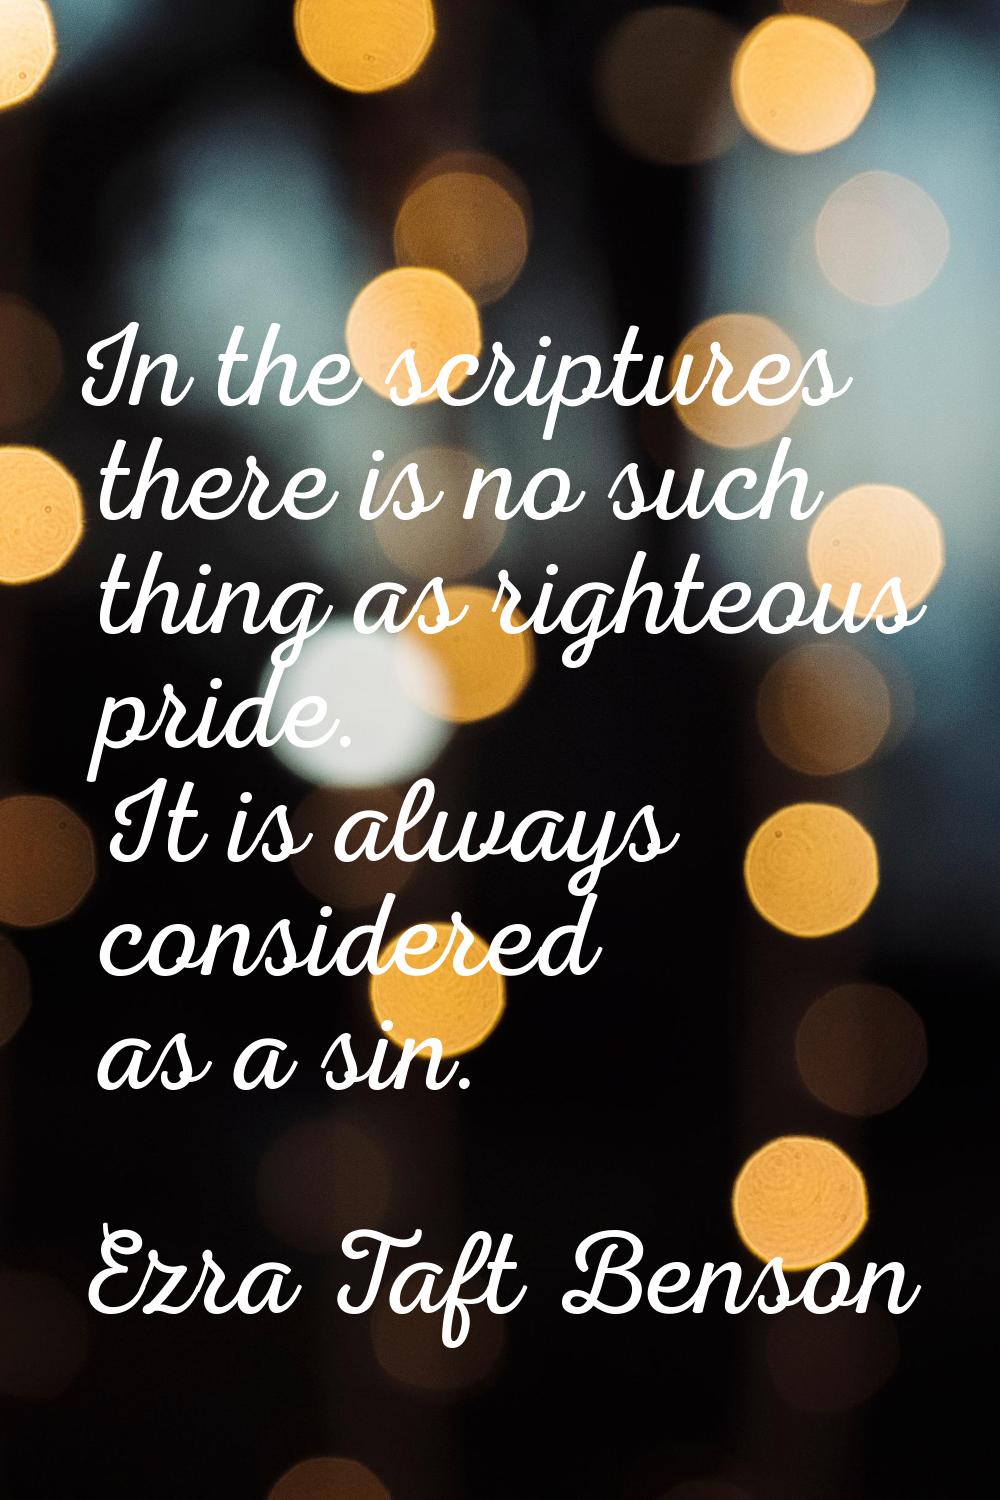 In the scriptures there is no such thing as righteous pride. It is always considered as a sin.